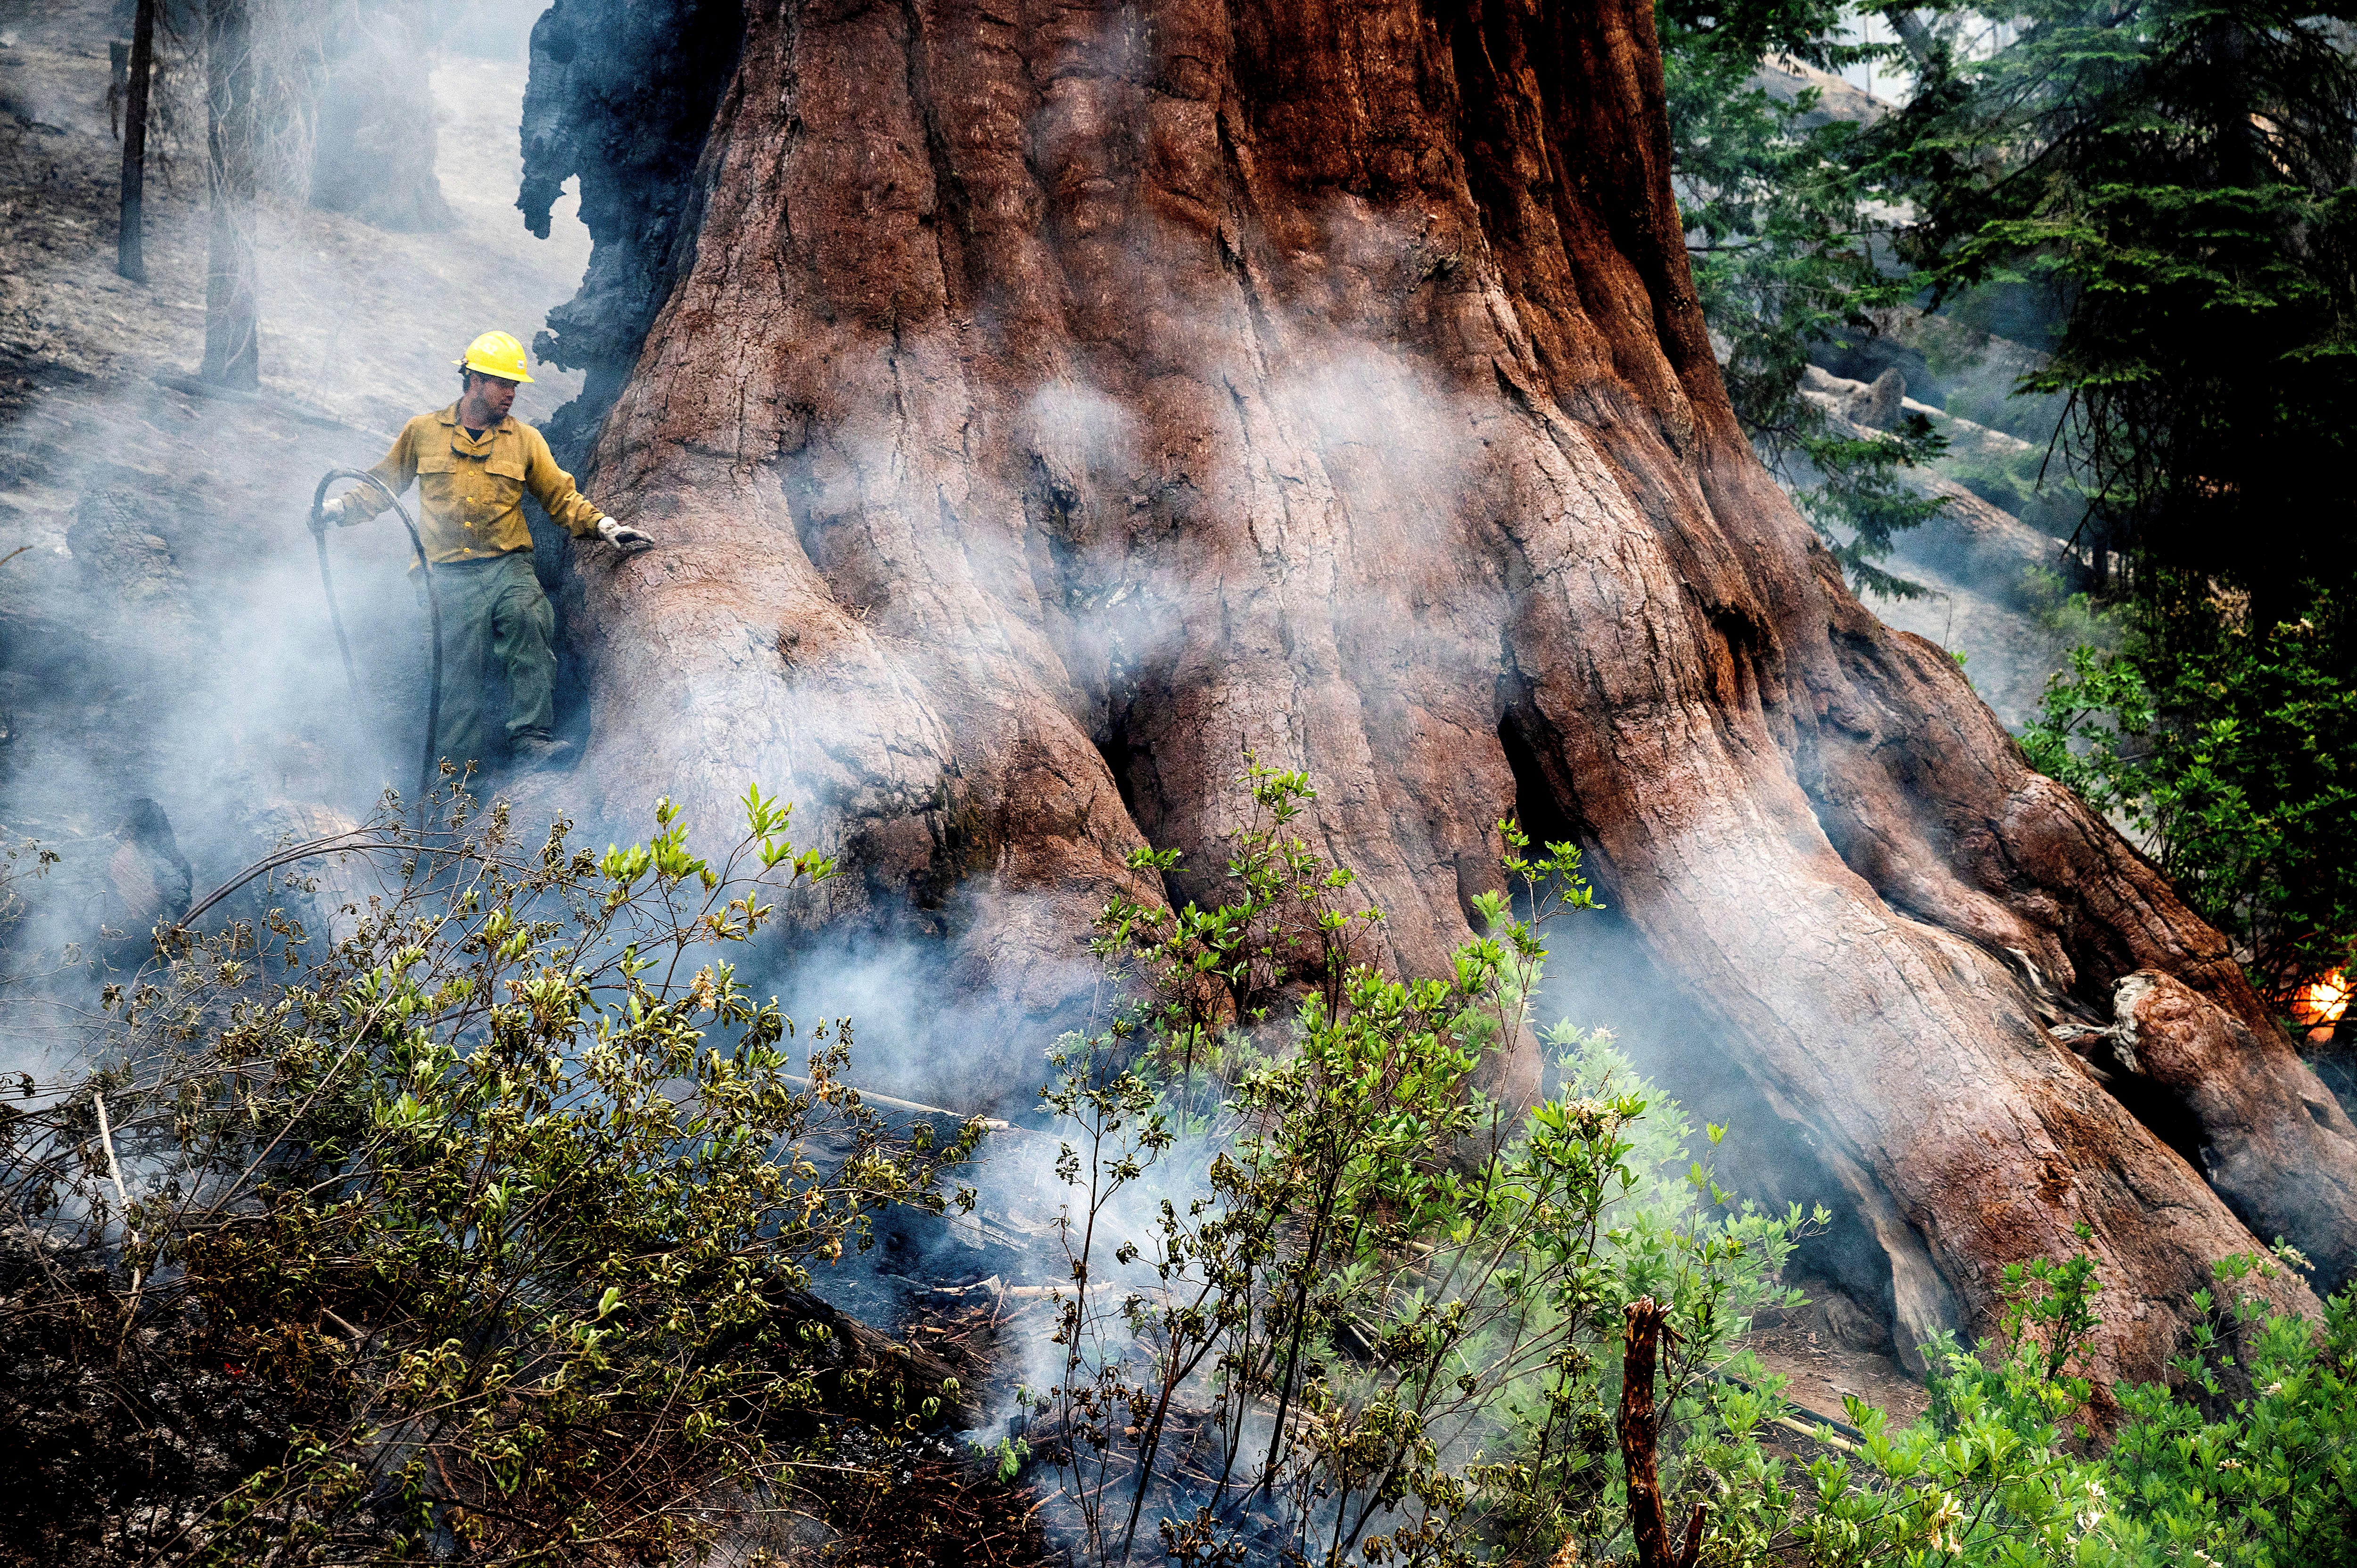 A firefighter waters down a sequoia tree as the Washburn Fire burned in Mariposa Grove, Yosemite National Park on Friday, July 8. (Photo: Noah Berger, AP)